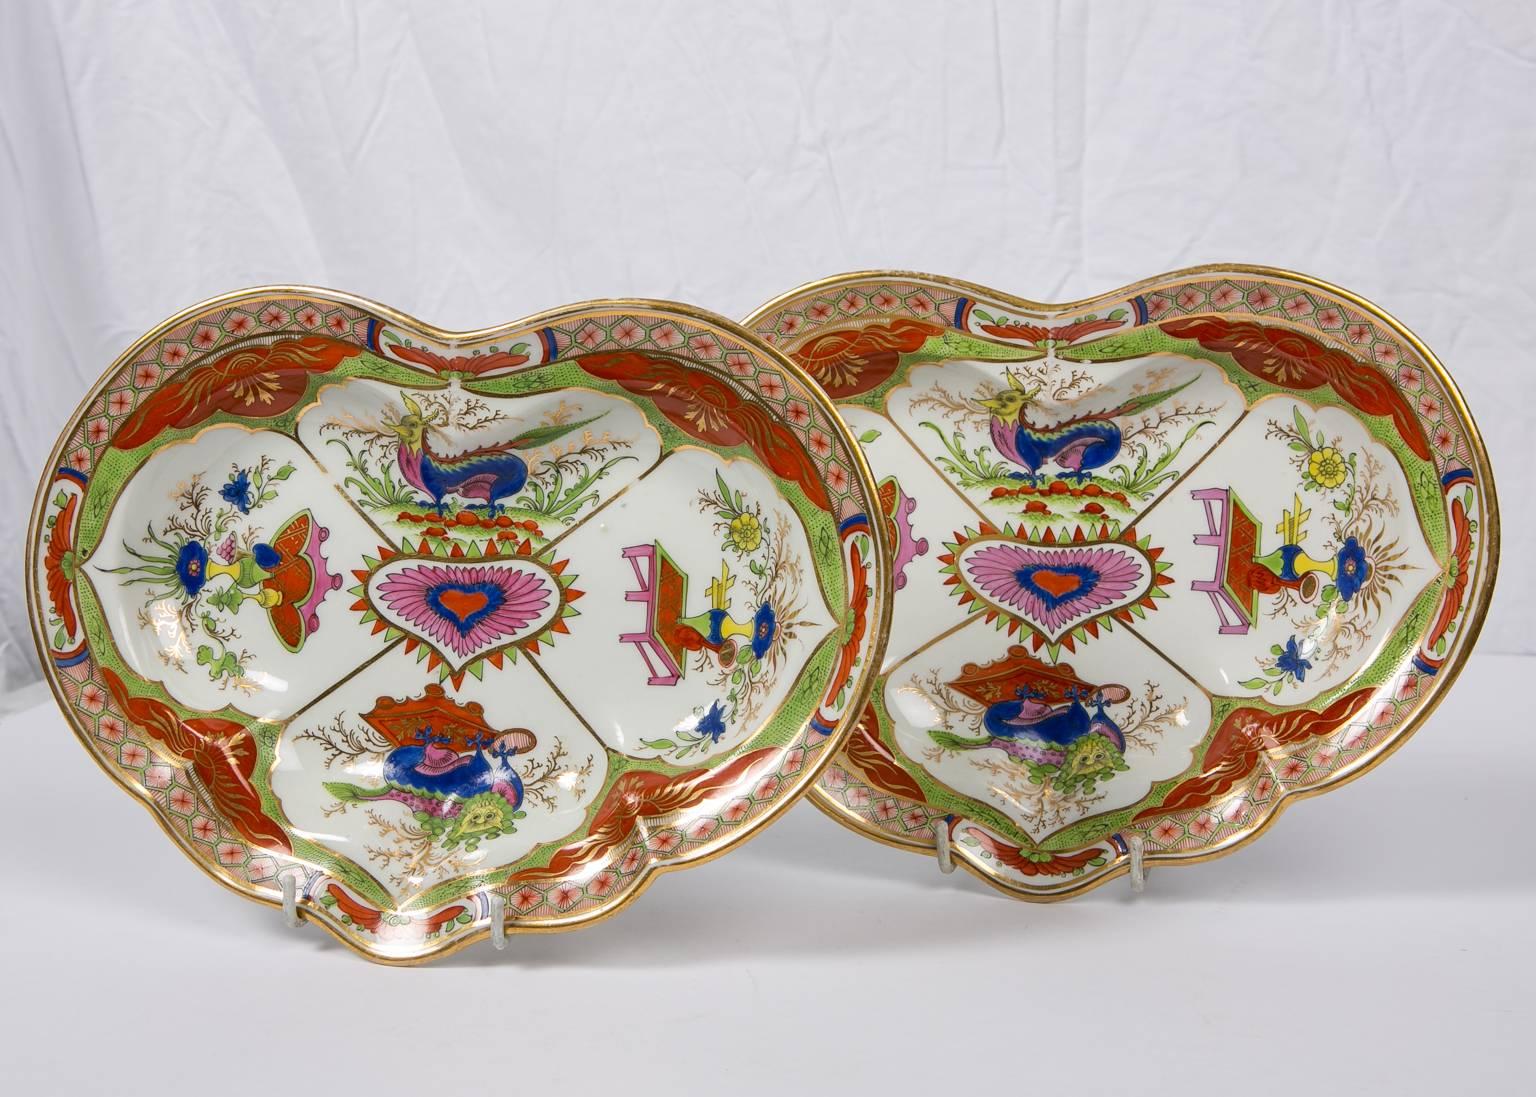 Worcester porcelain dragon in compartments heart shaped dishes pair made by Chamberlains Worcester, circa 1795-1805. The pattern is an exotic English interpretation of Chinese export porcelains from the Kangxi period. The design features four